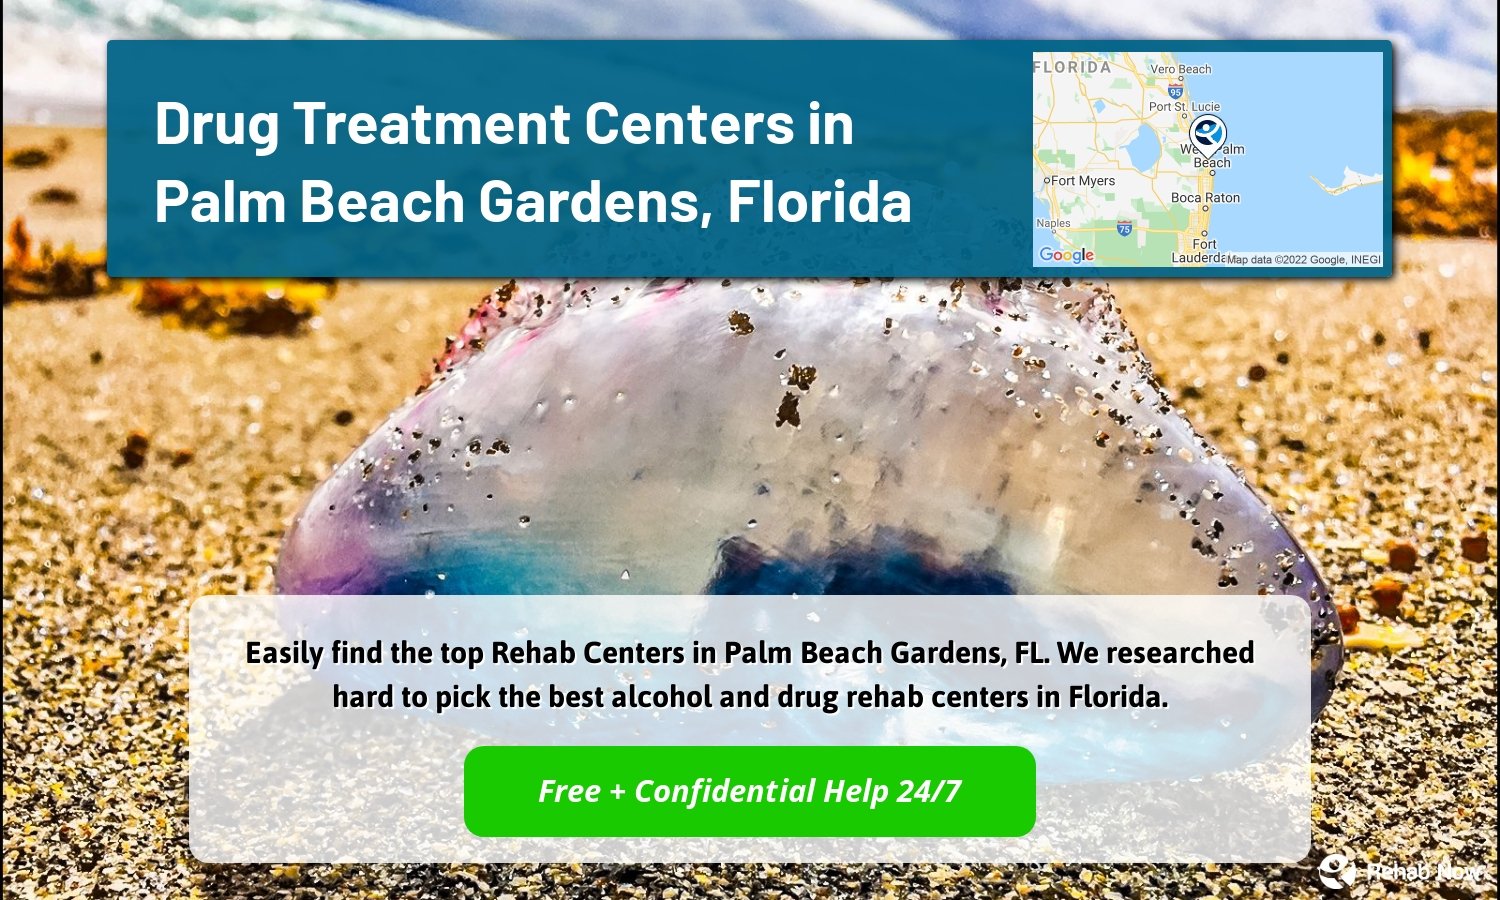 Easily find the top Rehab Centers in Palm Beach Gardens, FL. We researched hard to pick the best alcohol and drug rehab centers in Florida.